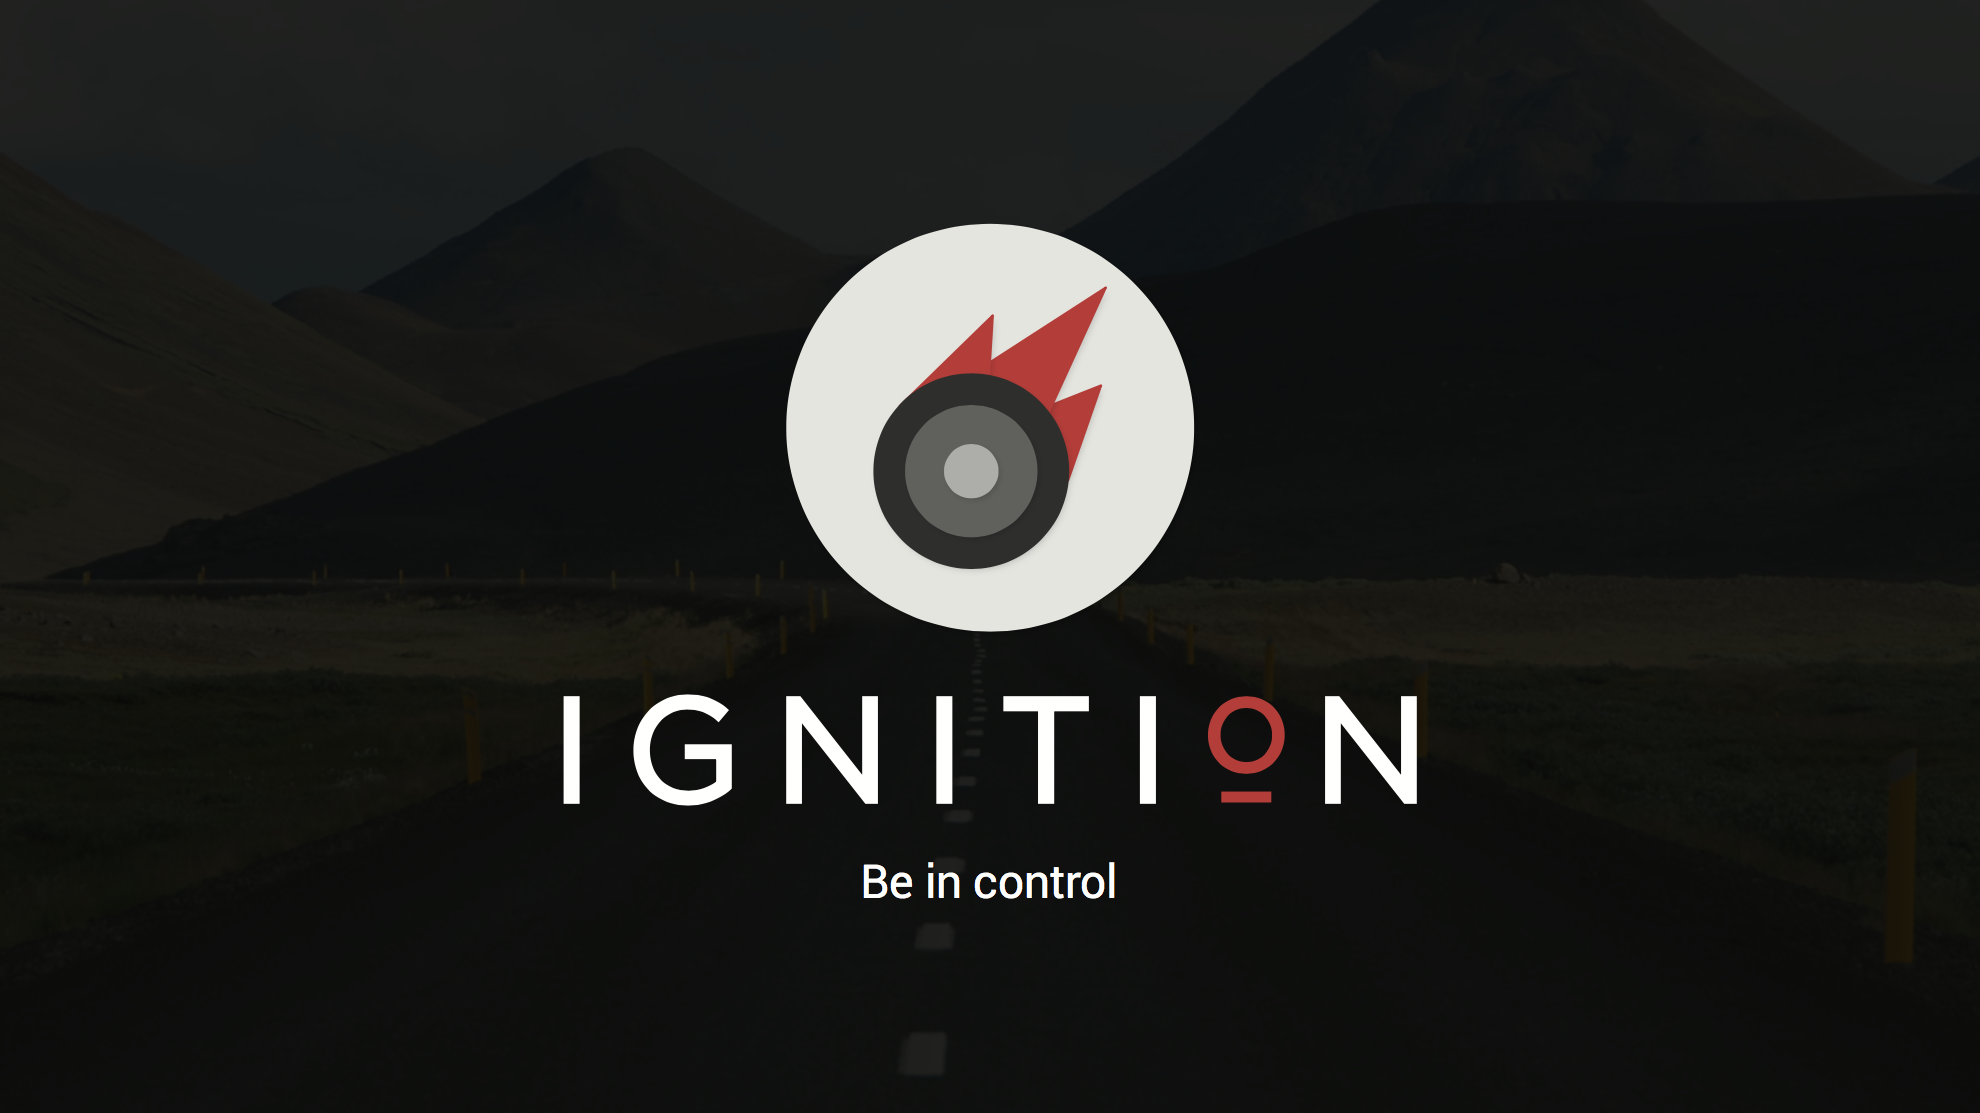 Ignition mobile app